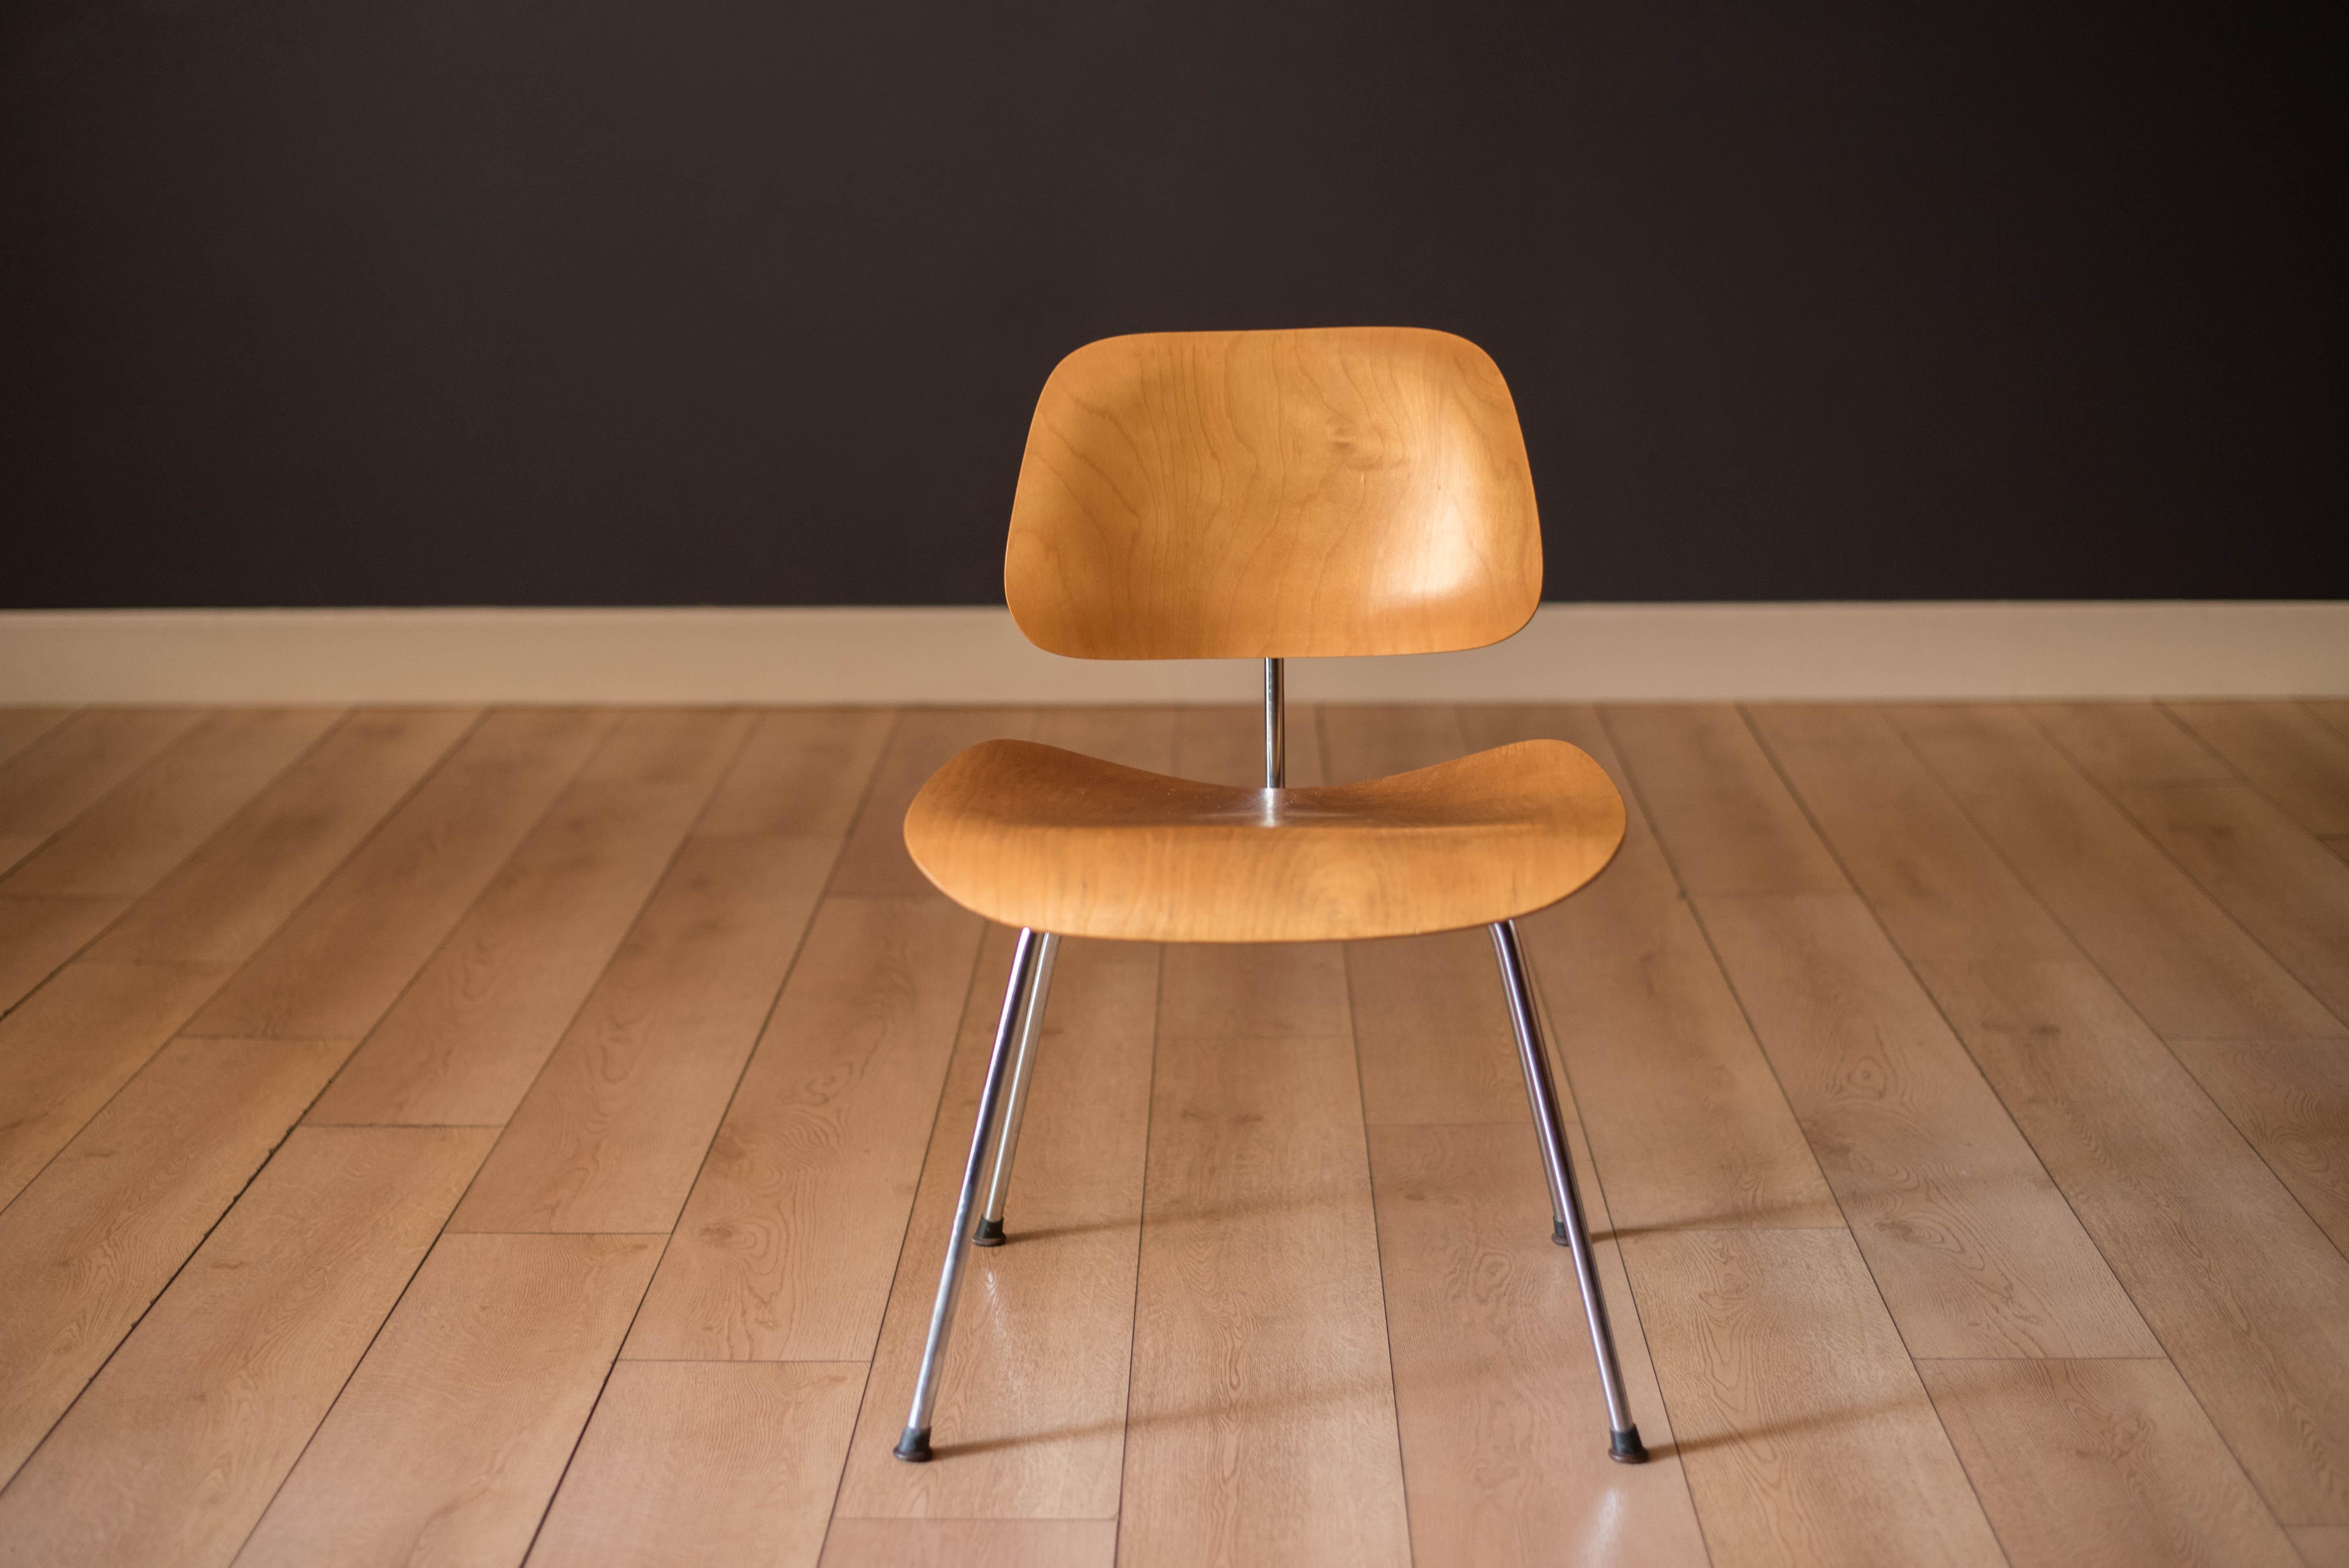 Mid Century Modern DCM dining height side chair by Ray and Charles Eames first generation for Herman Miller circa 1953. This collectible piece features a classic molded plywood seat and backrest in ash wood supported by a sturdy steel rod base.